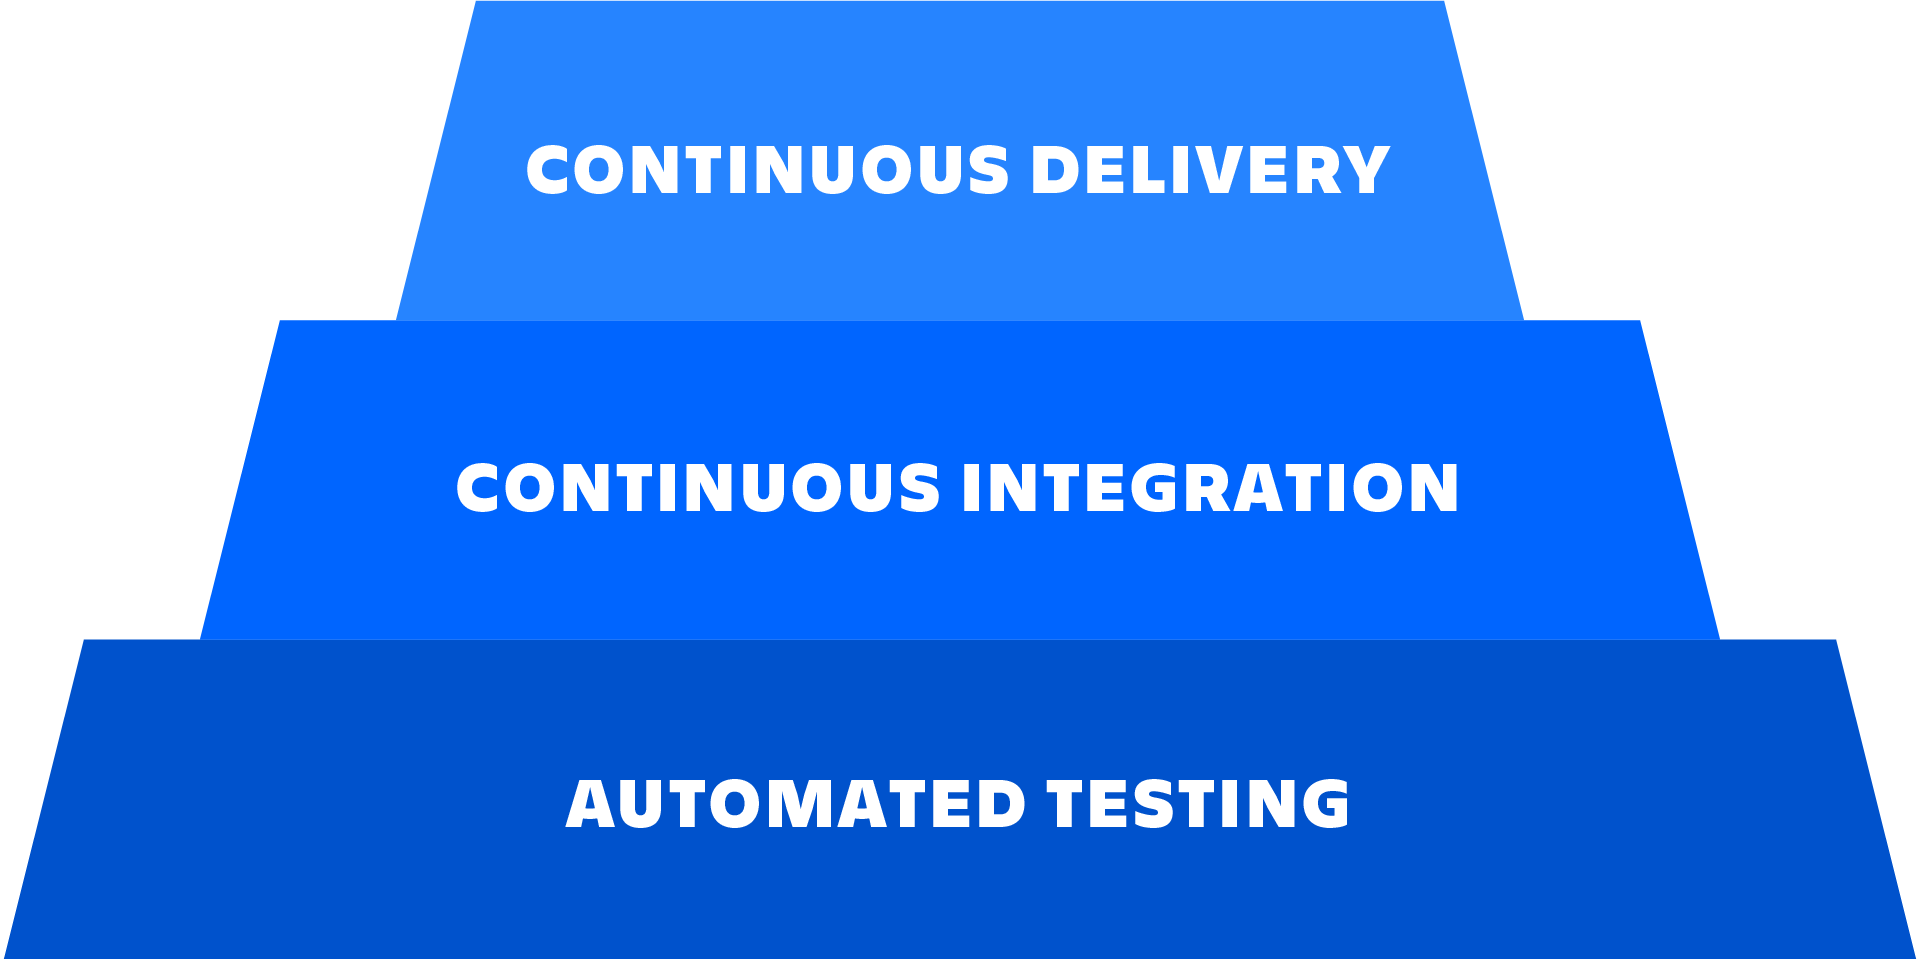 A diagram describing the relationship between automated testing, continuous integration, and continuous delivery.